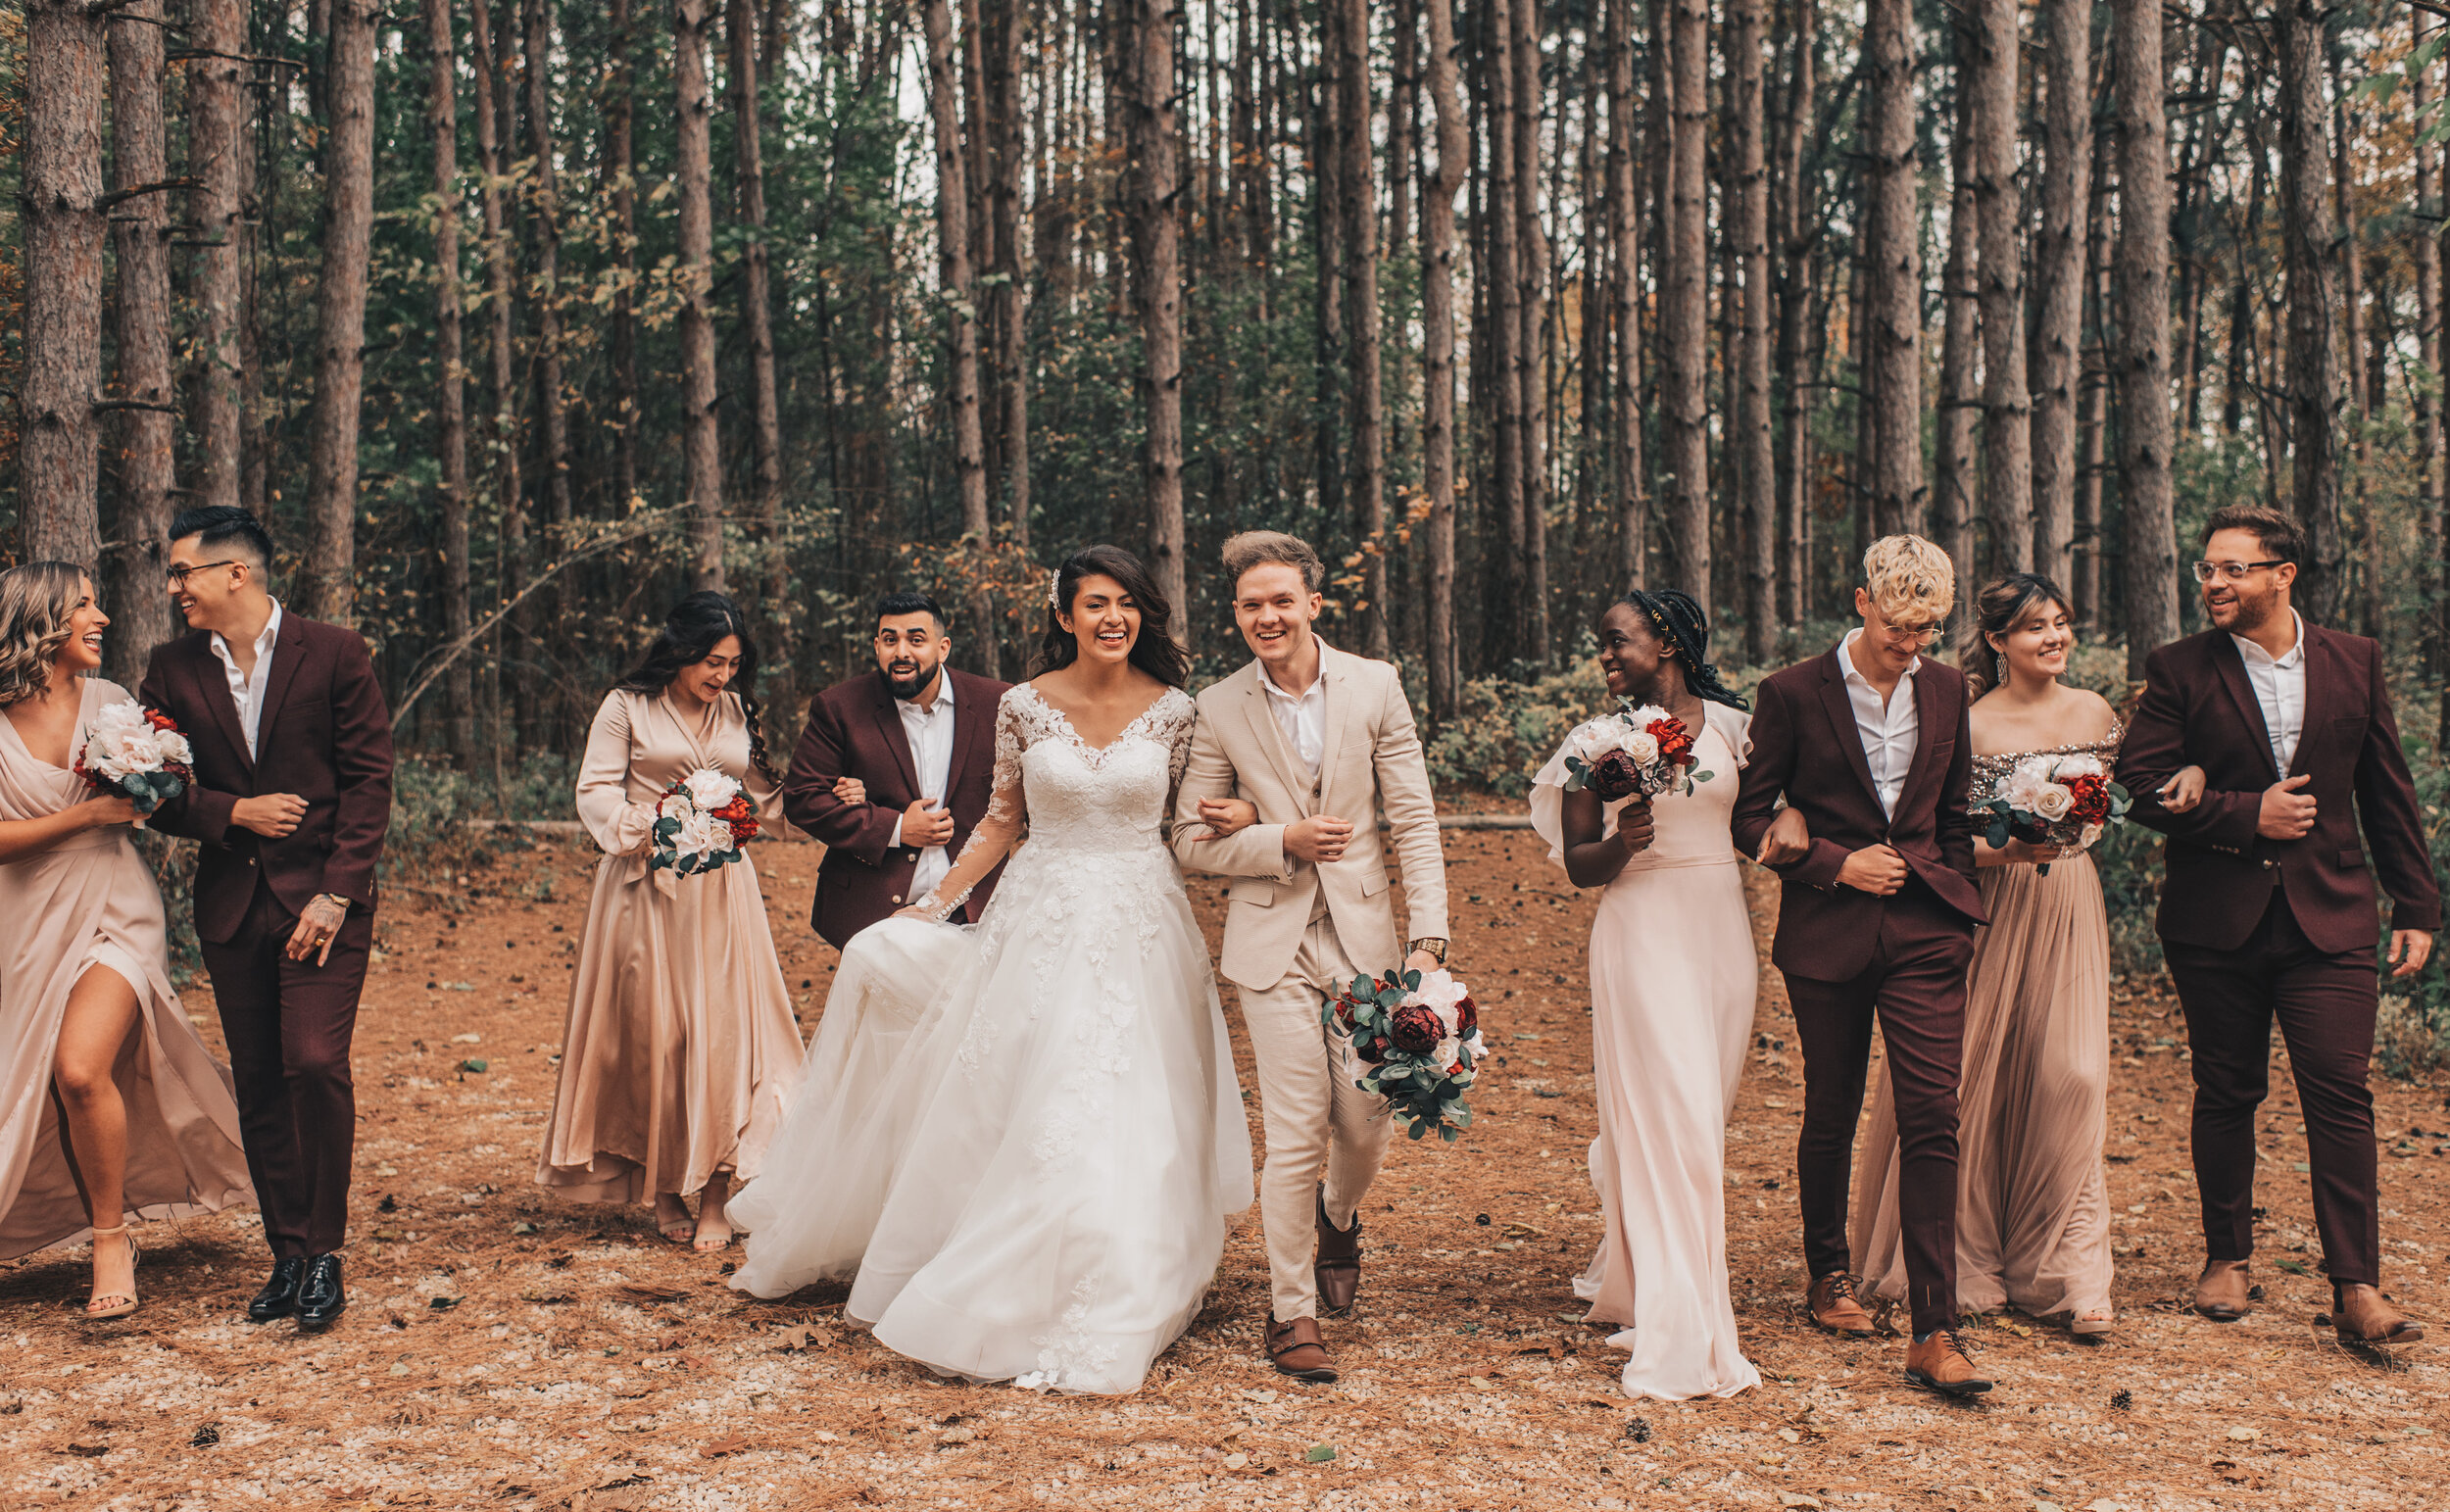 Wisconsin Wedding, Midwest Airbnb Wedding, Adventurous Airbnb Wedding, Outdoor Fall Modern Rustic Wedding, Wisconsin Photographer, Wisconsin Wedding Venue, Forest Pine Trees Bridal Party Photos